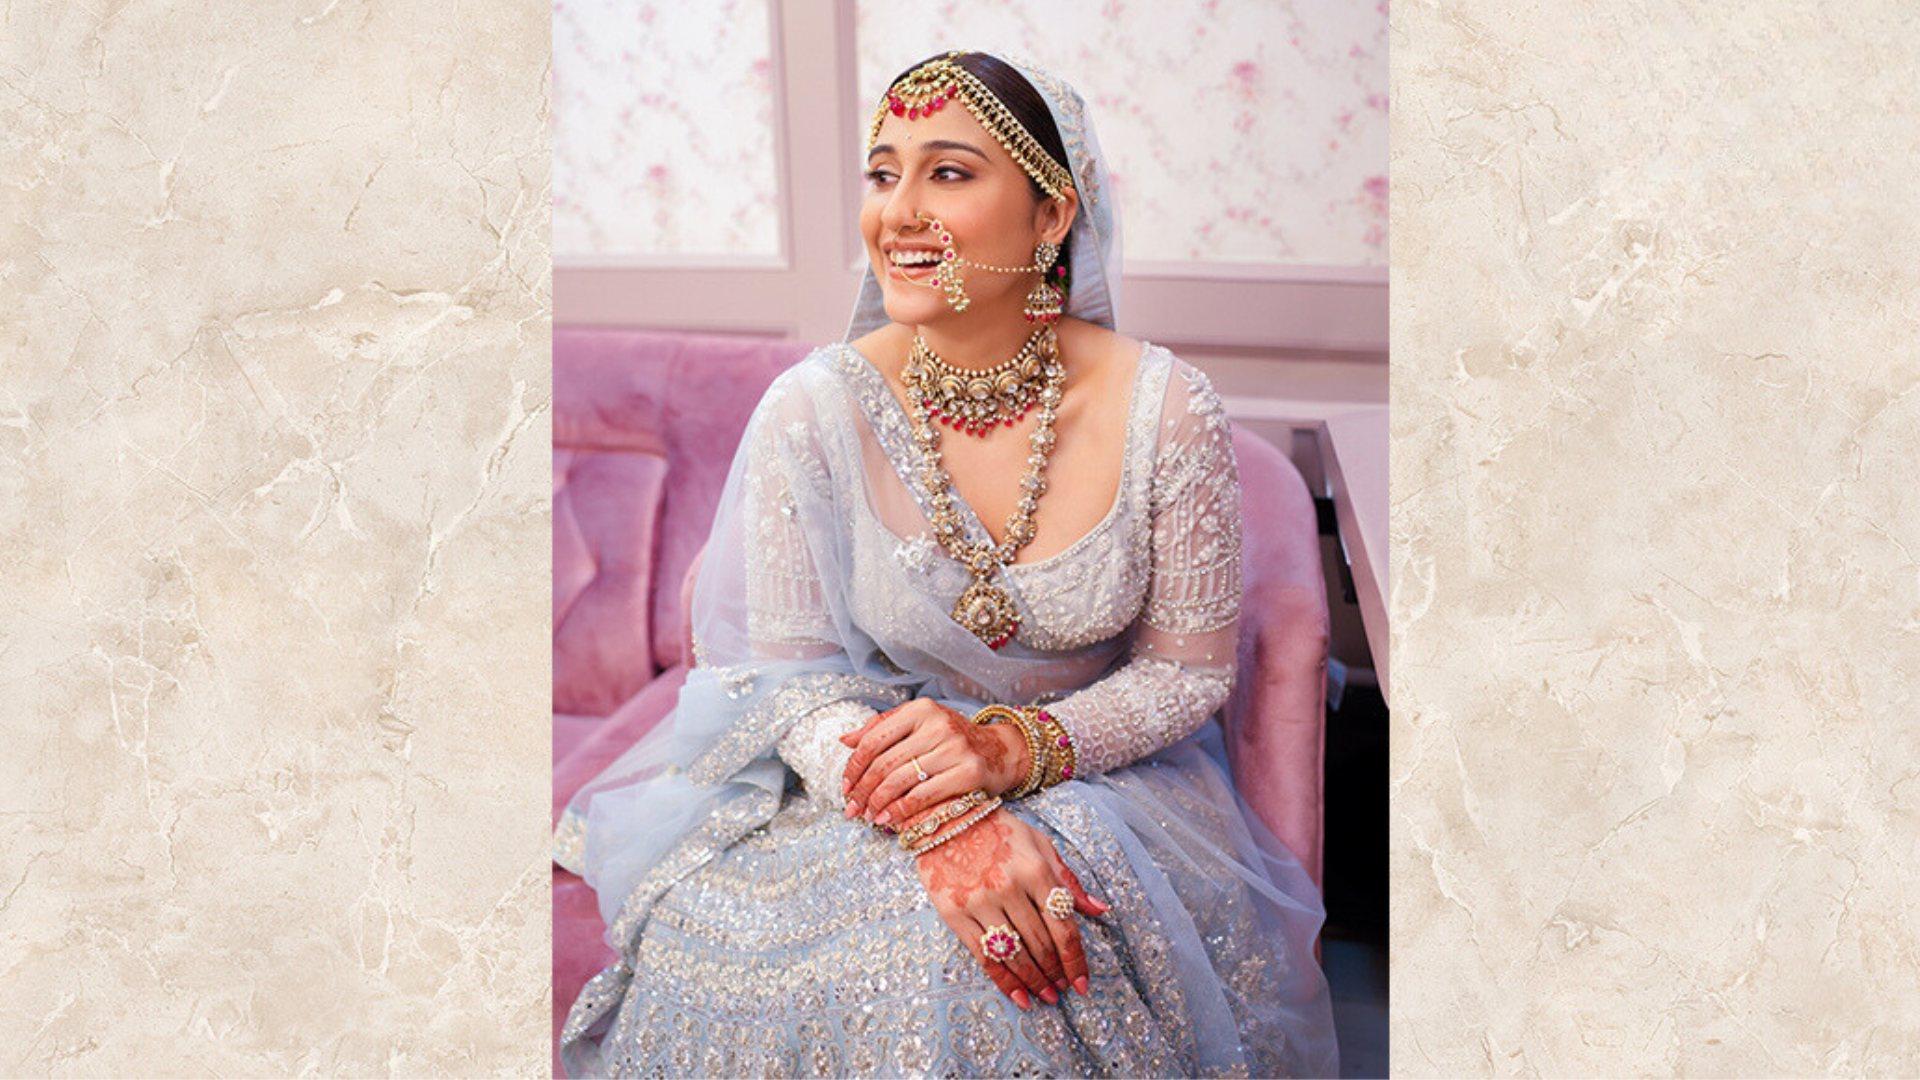 The Big Day: Look Stunning and Unique In Your Bridal Avatar